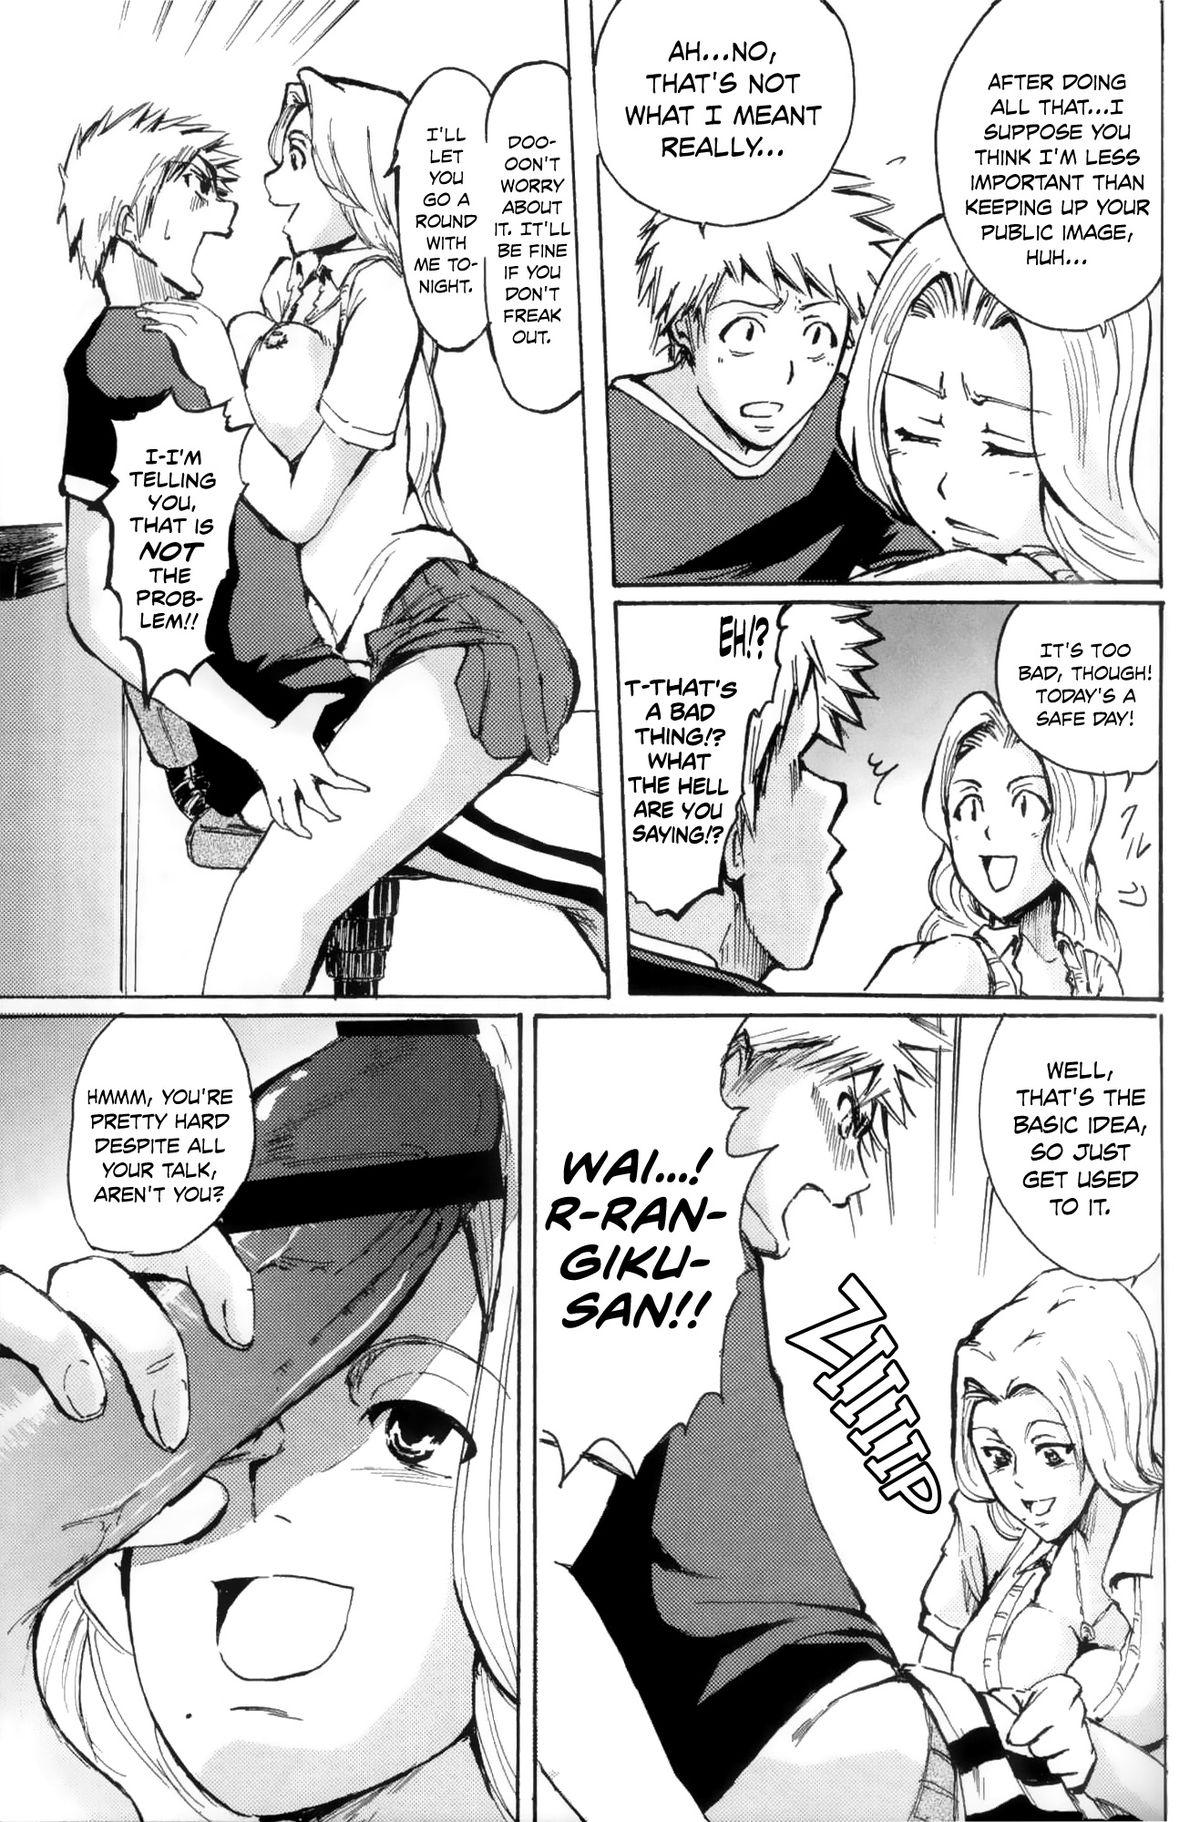 Rough Porn NO MERCY 4 - Bleach Spooning - Page 6